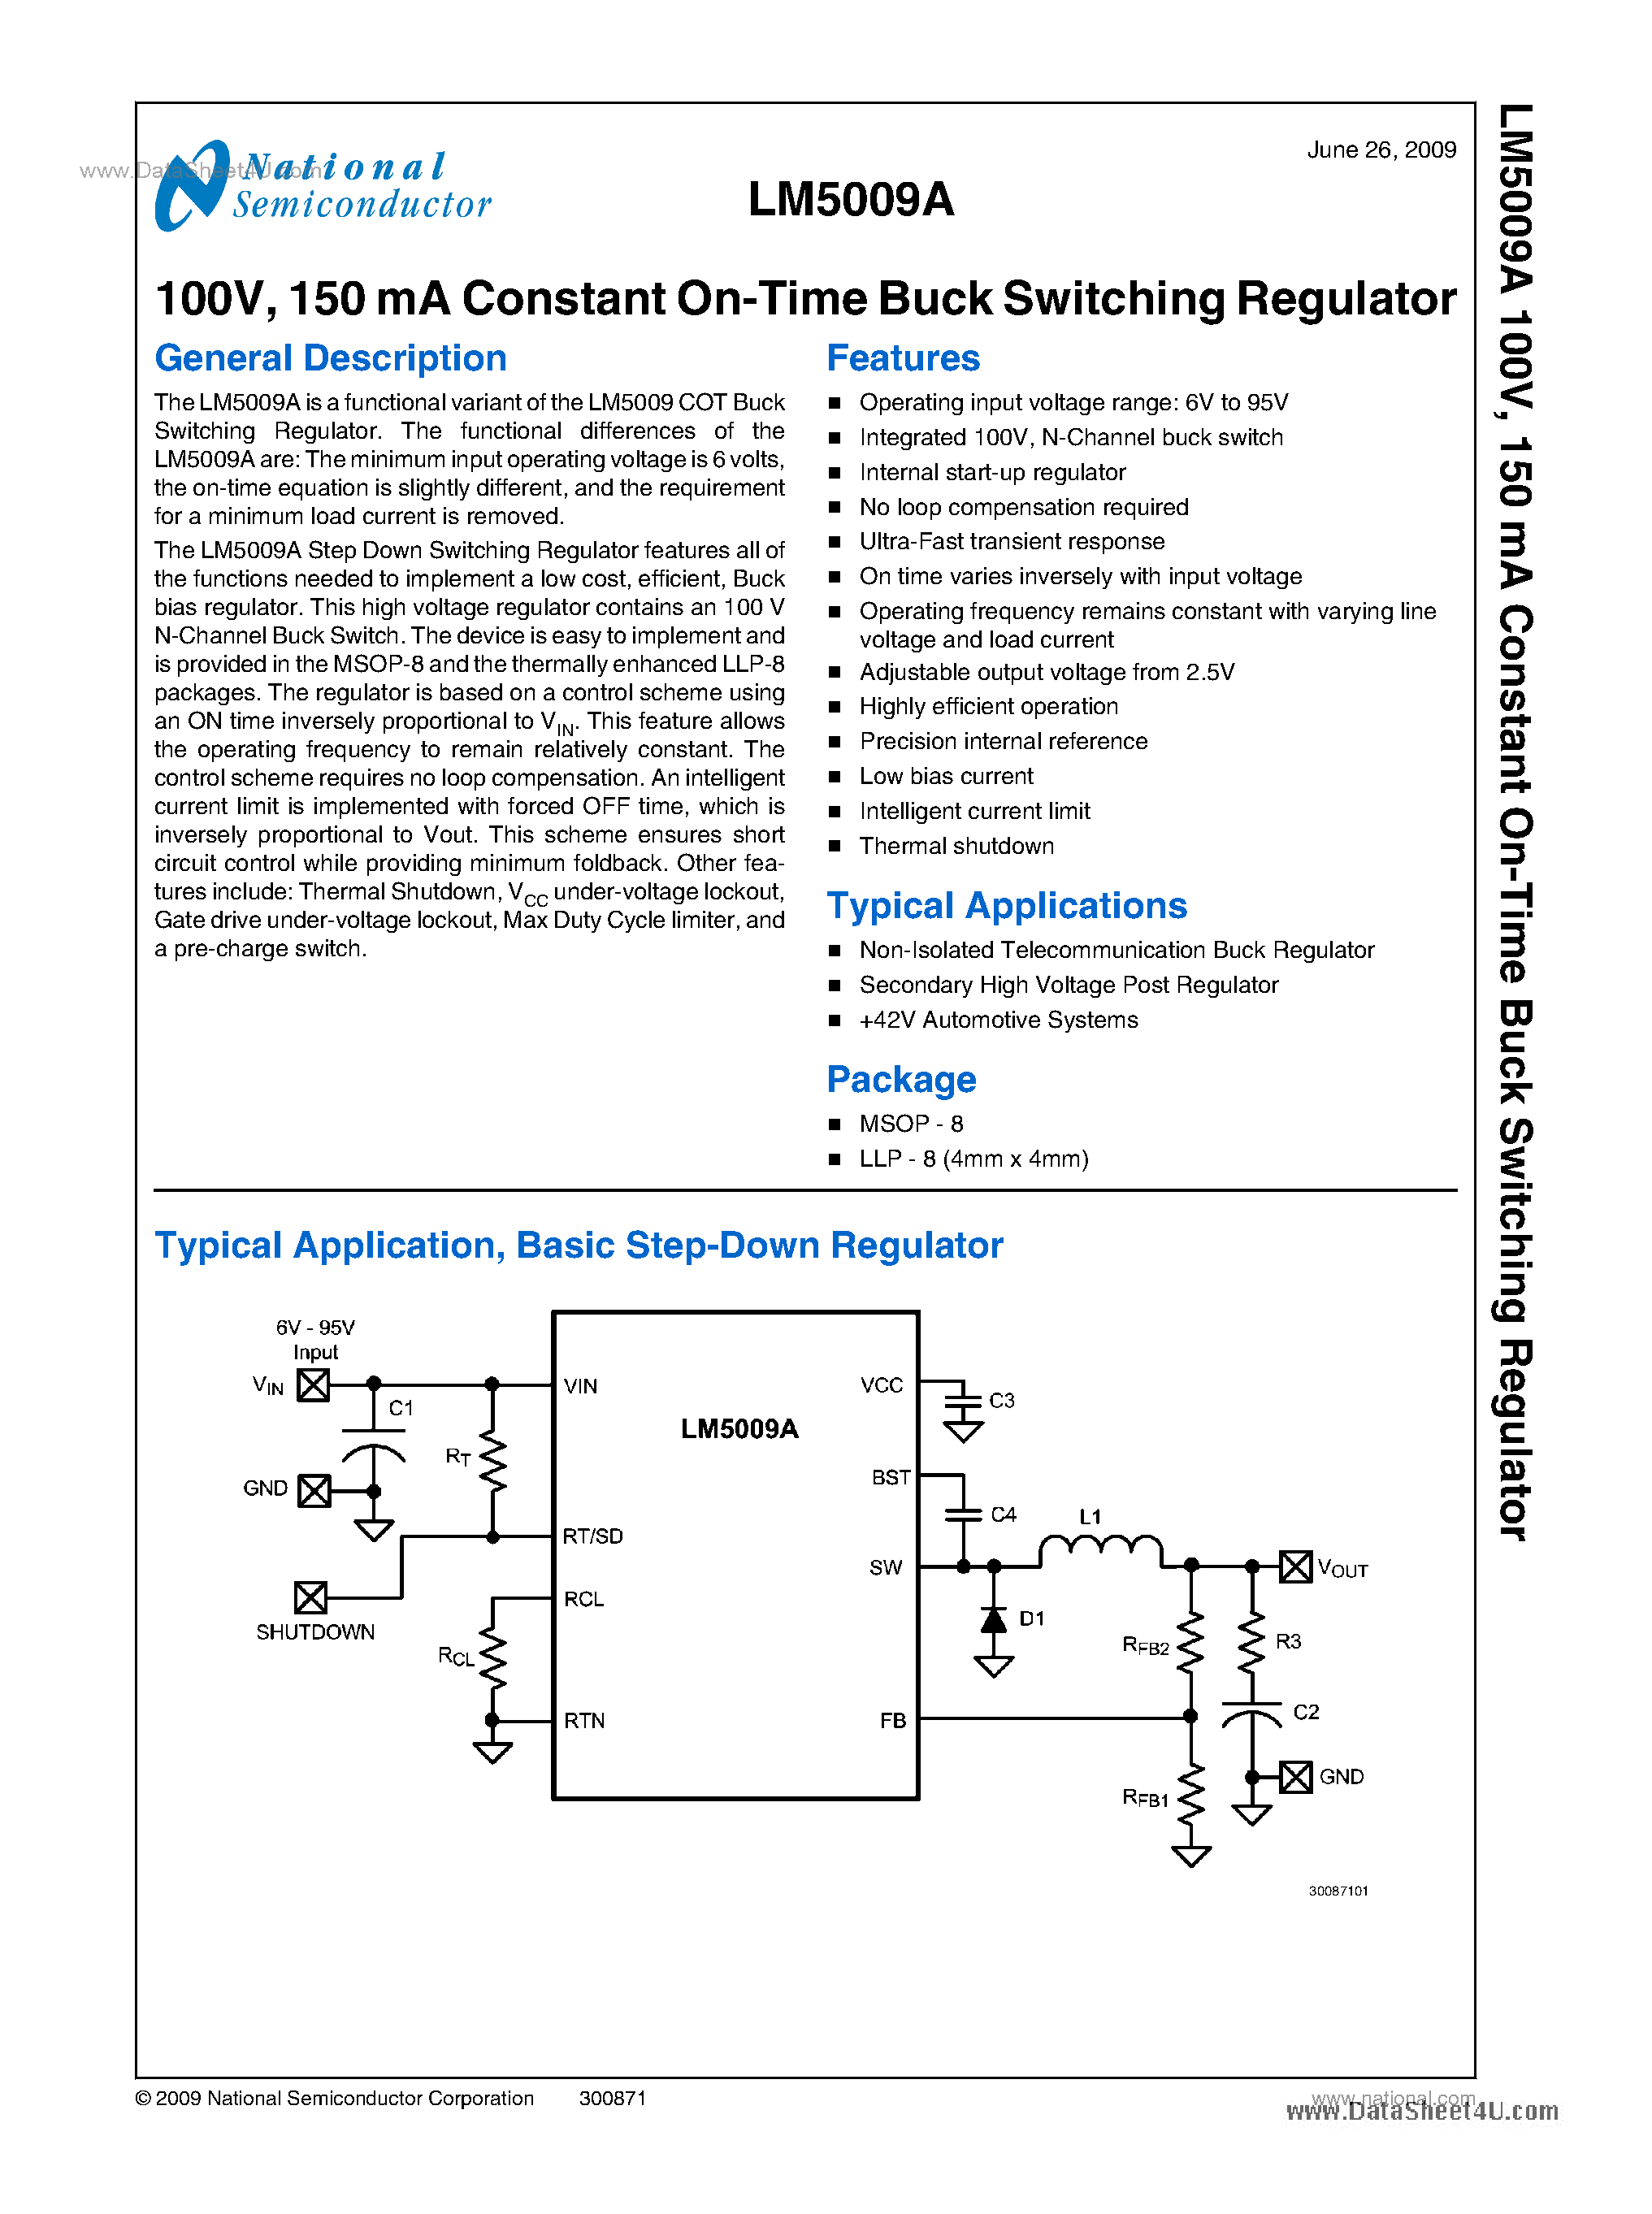 Datasheet LM5009A - 150 mA Constant On-Time Buck Switching Regulator page 1